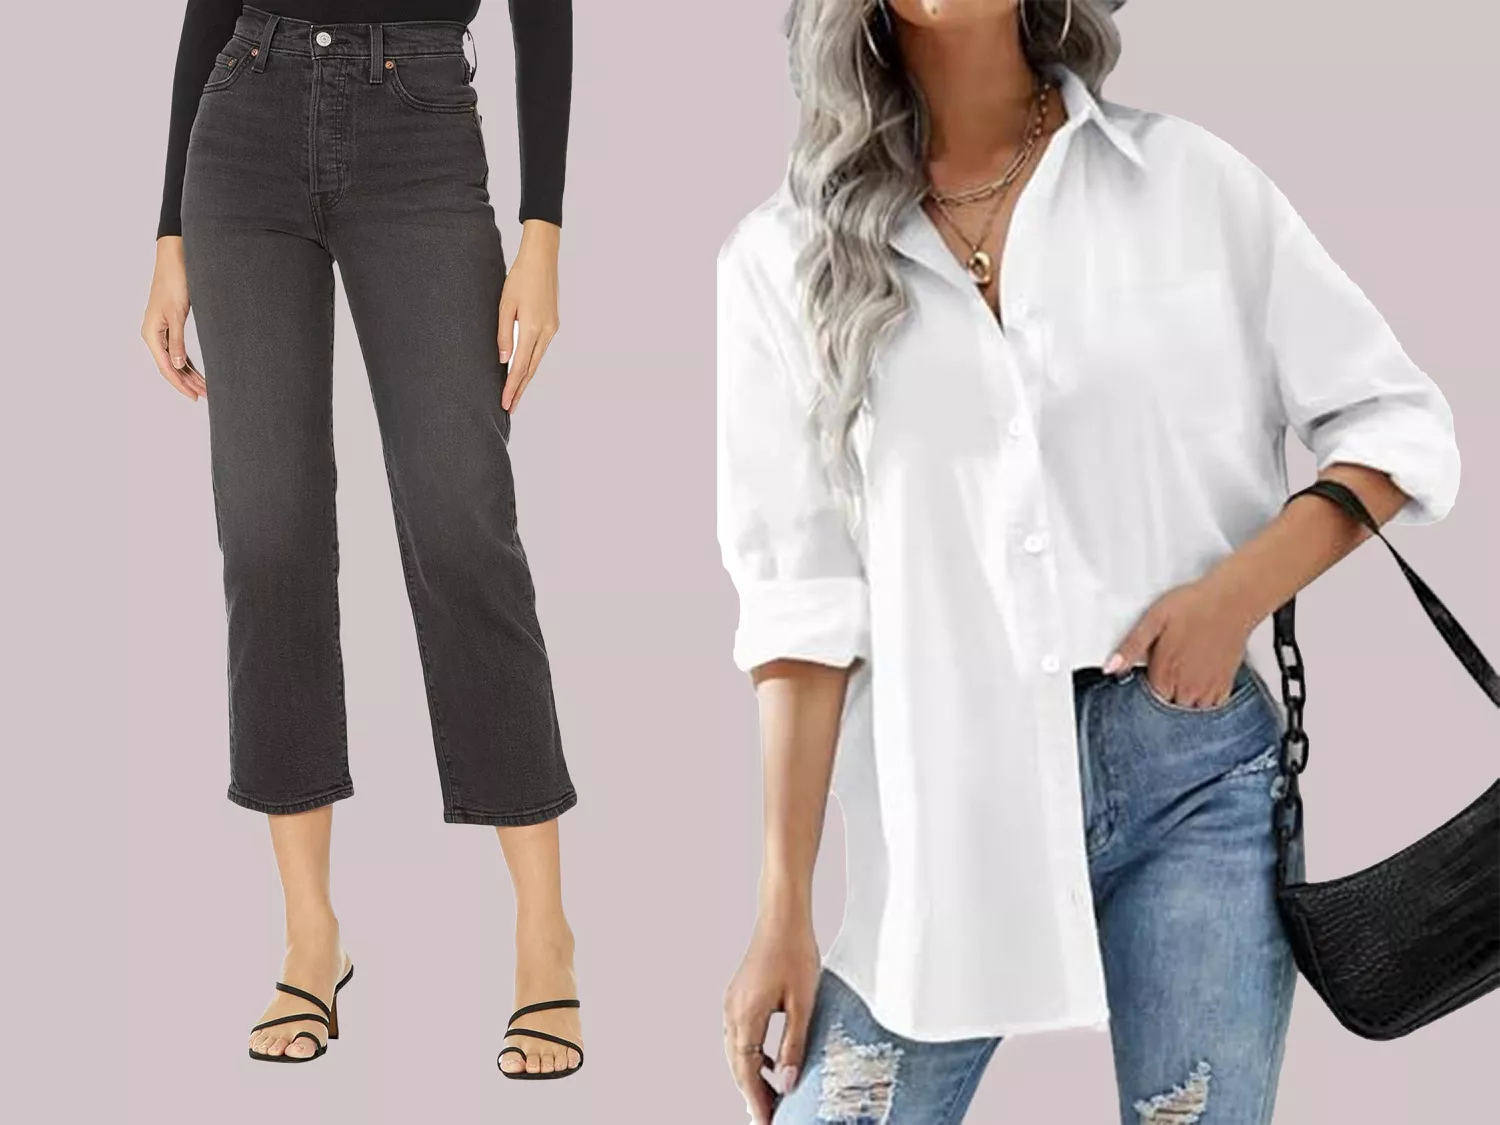 I’m a Fashion Snob, and I’m Buying These 10 Elevated Amazon Basics From Coach and Levi’s